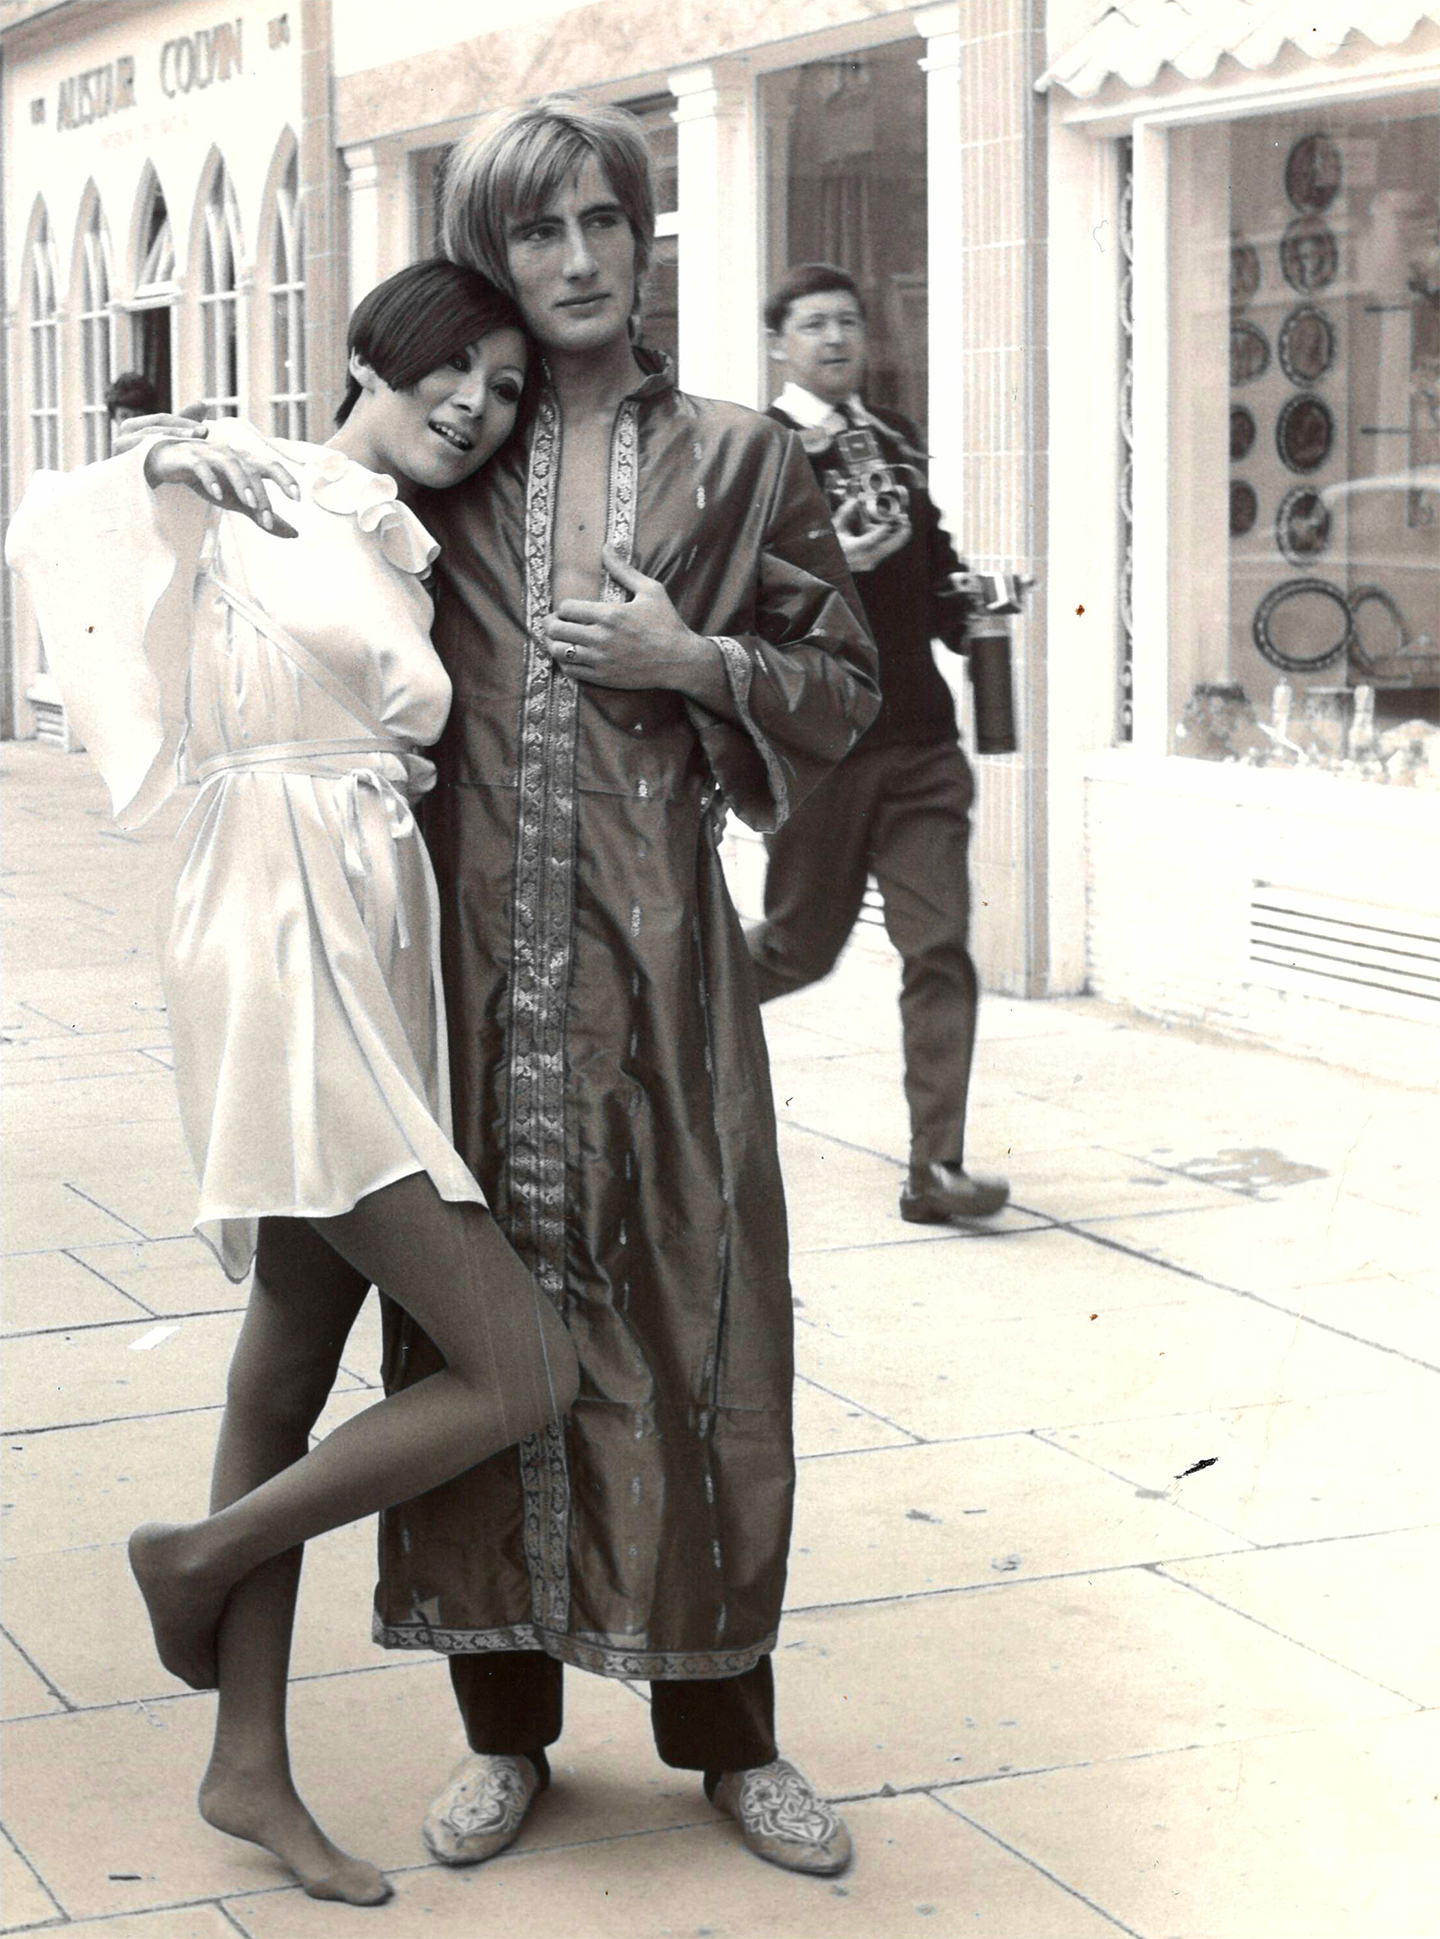 Models wearing Ossie Clark from English Boy models agency in Chelsea, around 1970s. English Boy was the most important model agency of the time, featuring talents like Marisa Berenson and Amanda Lear, just to name a few